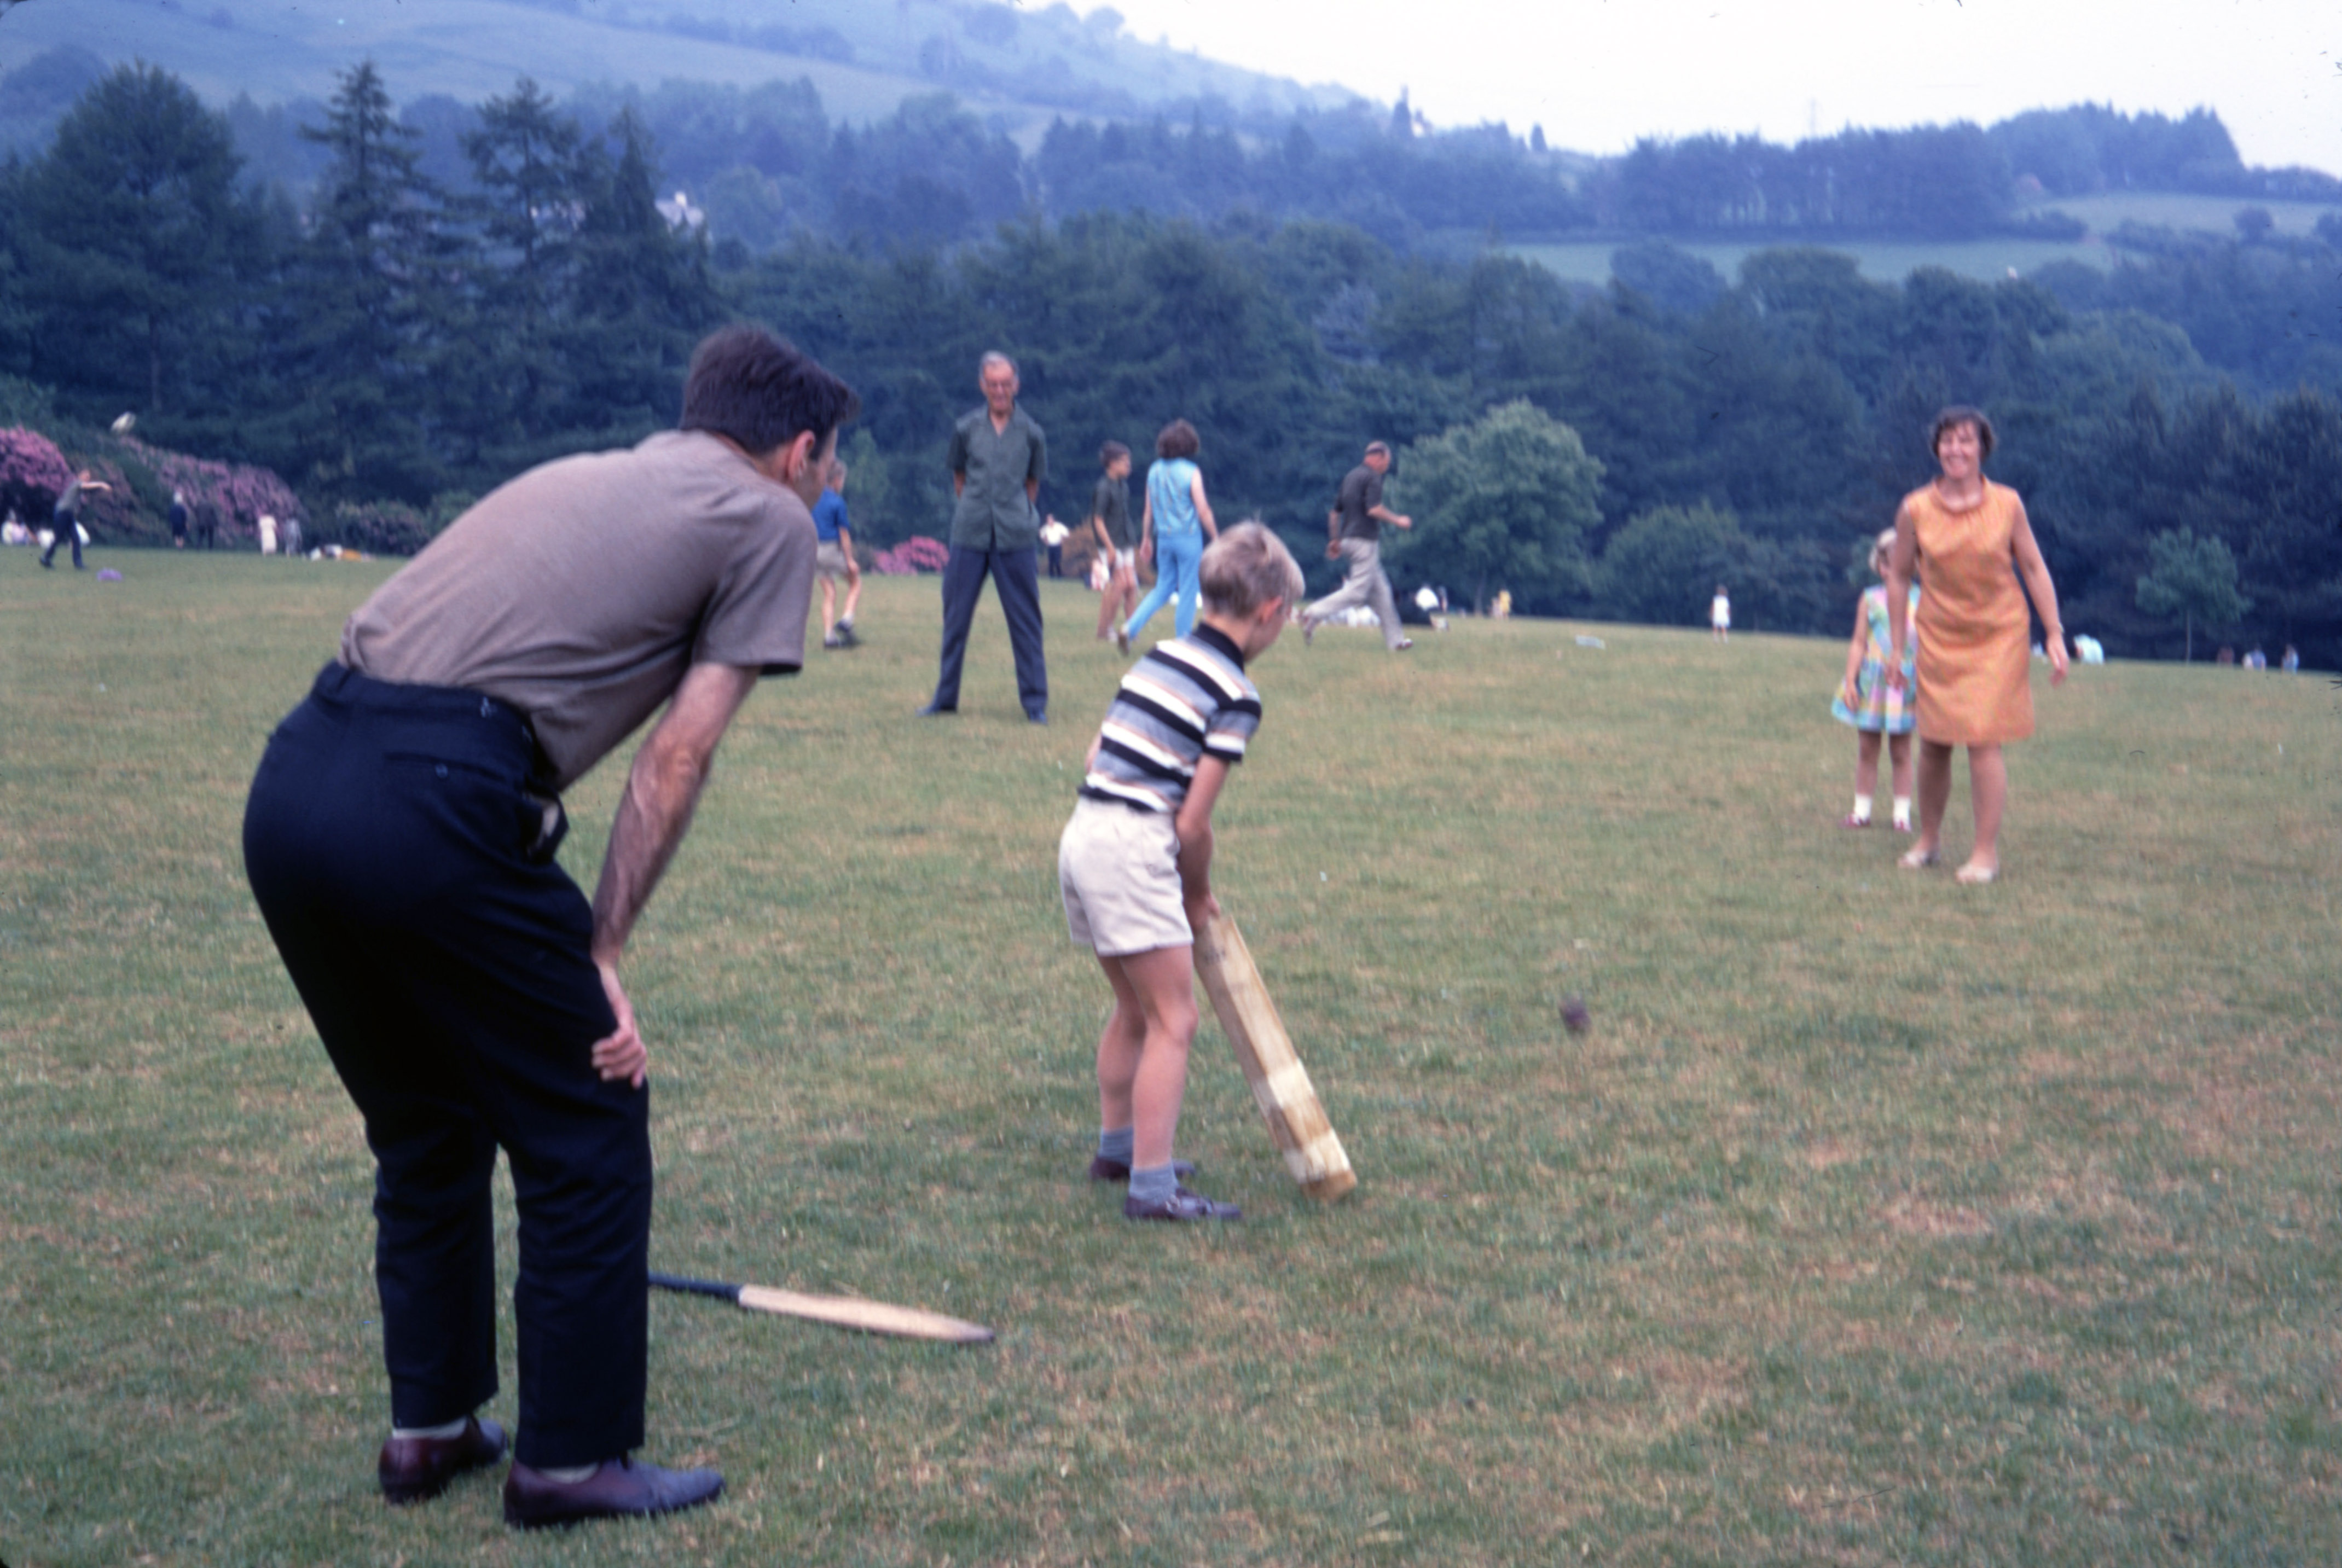 April 1968 The family playing cricket at Cefn Onn.